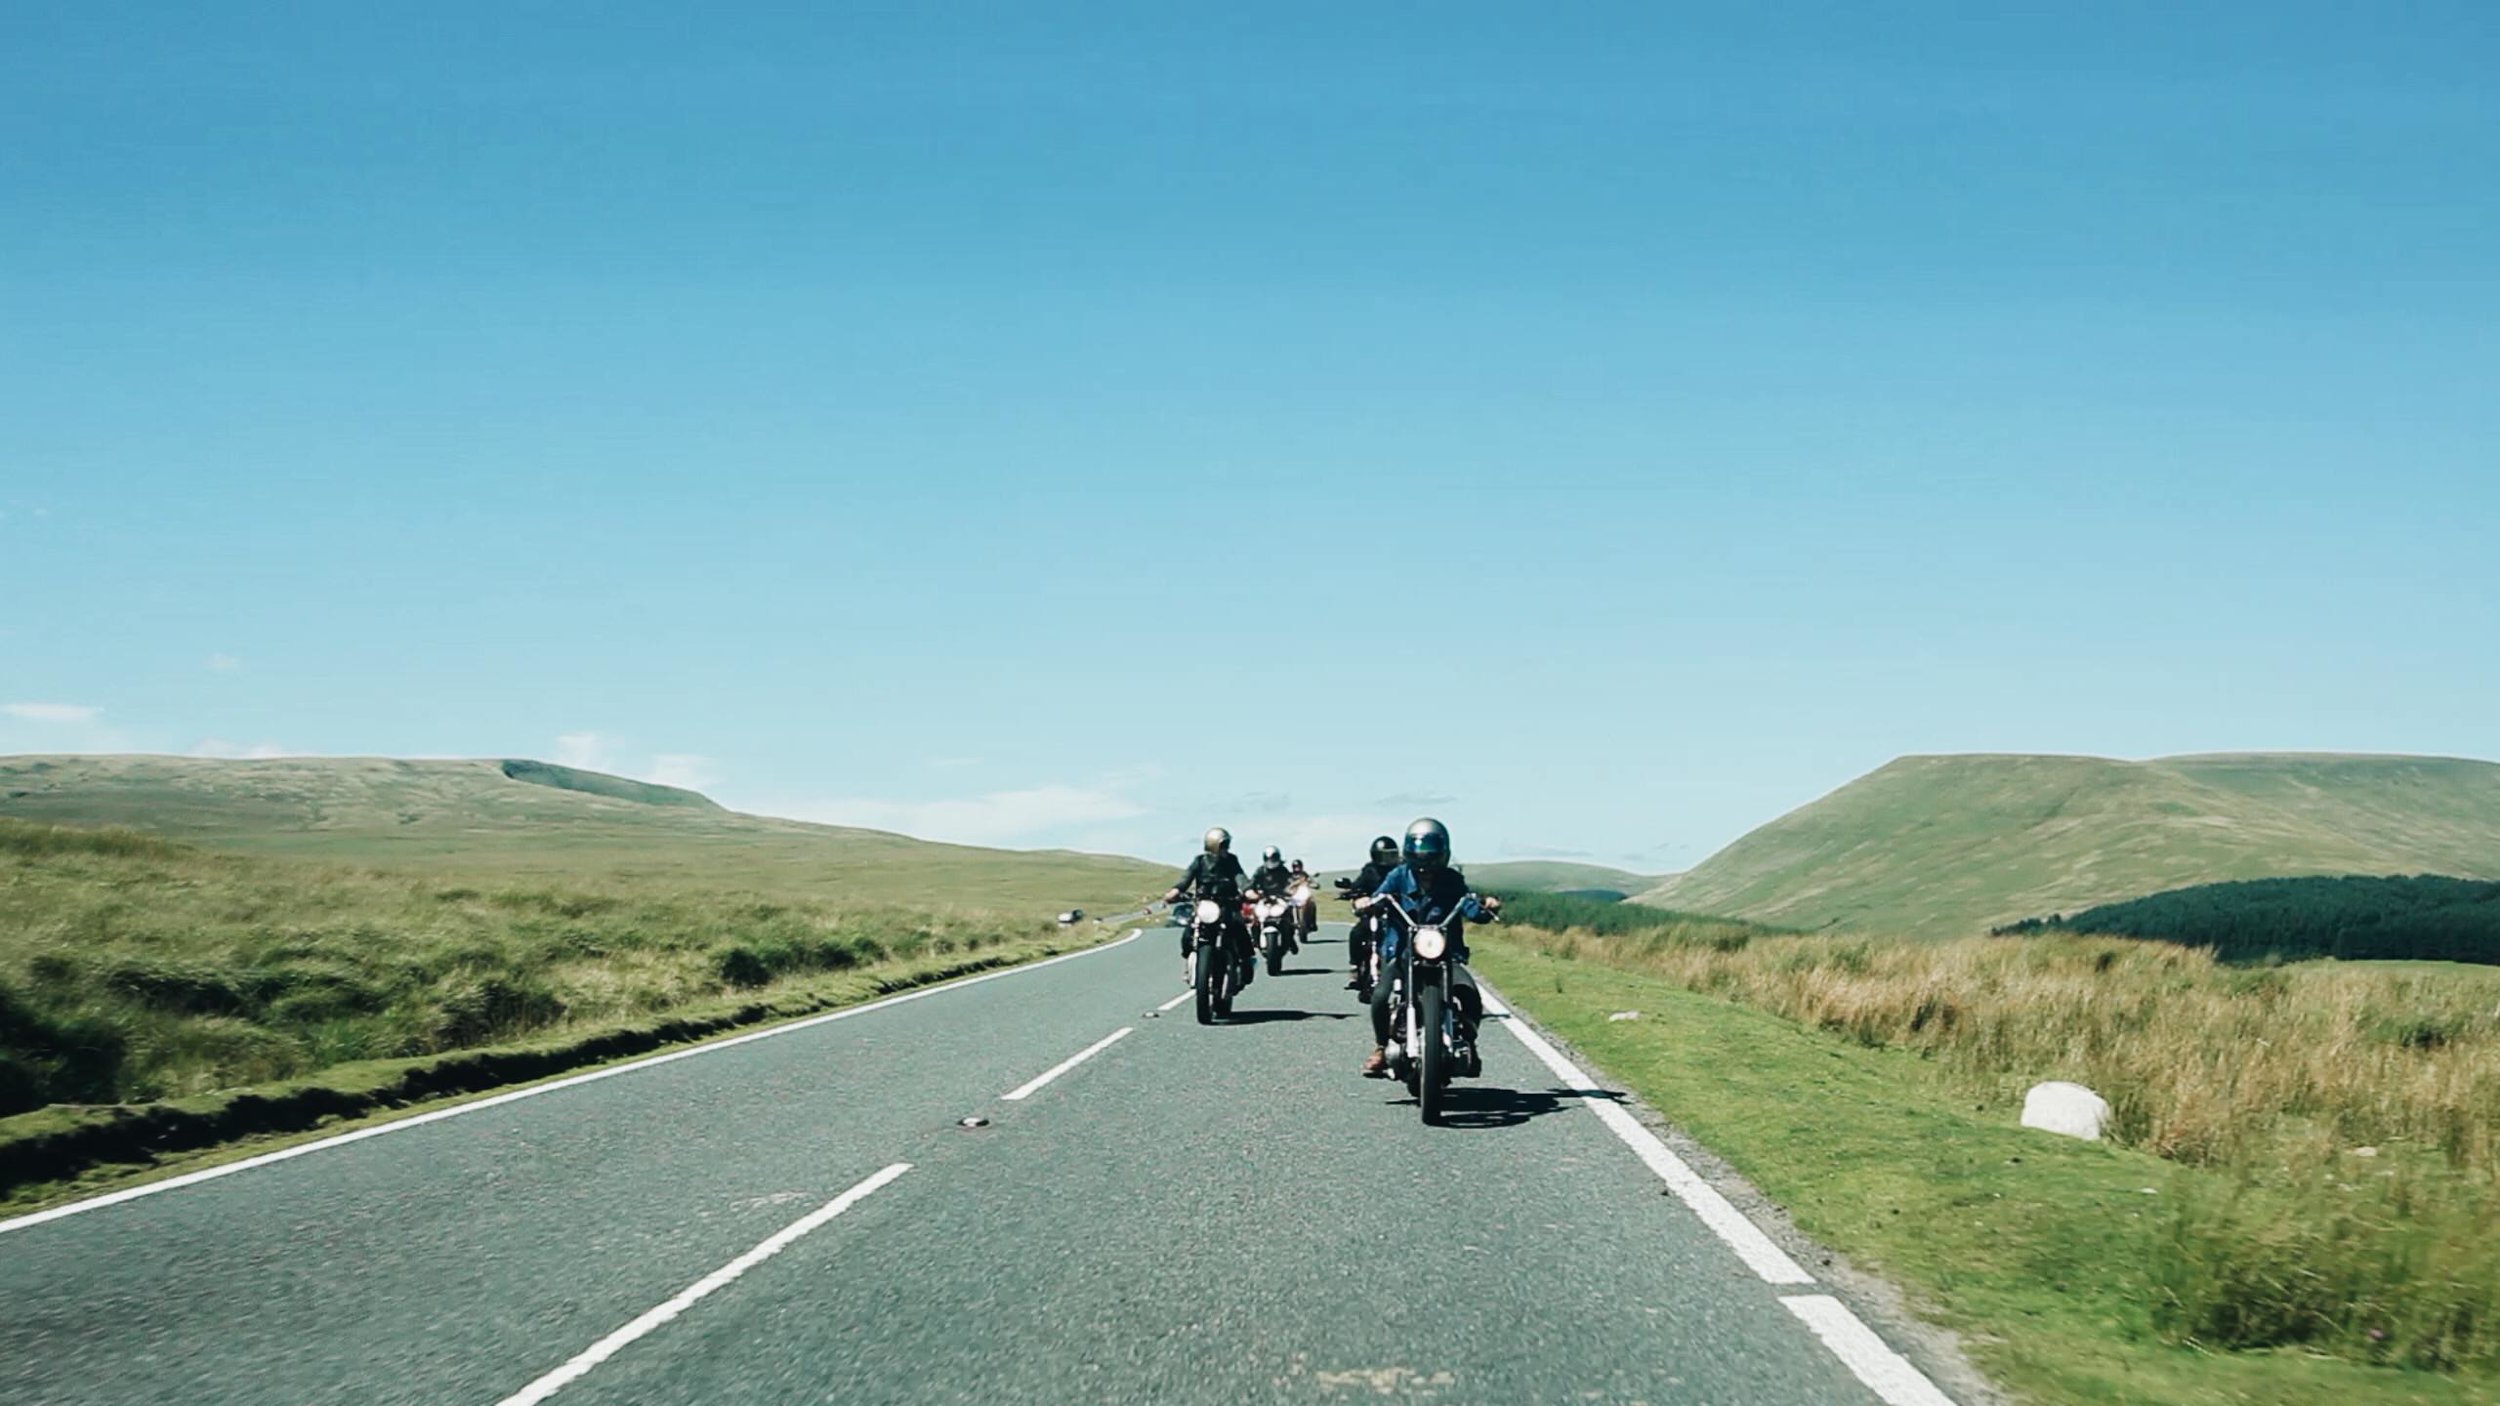 The Brecon Beacons provide some of the most incredible riding in the UK